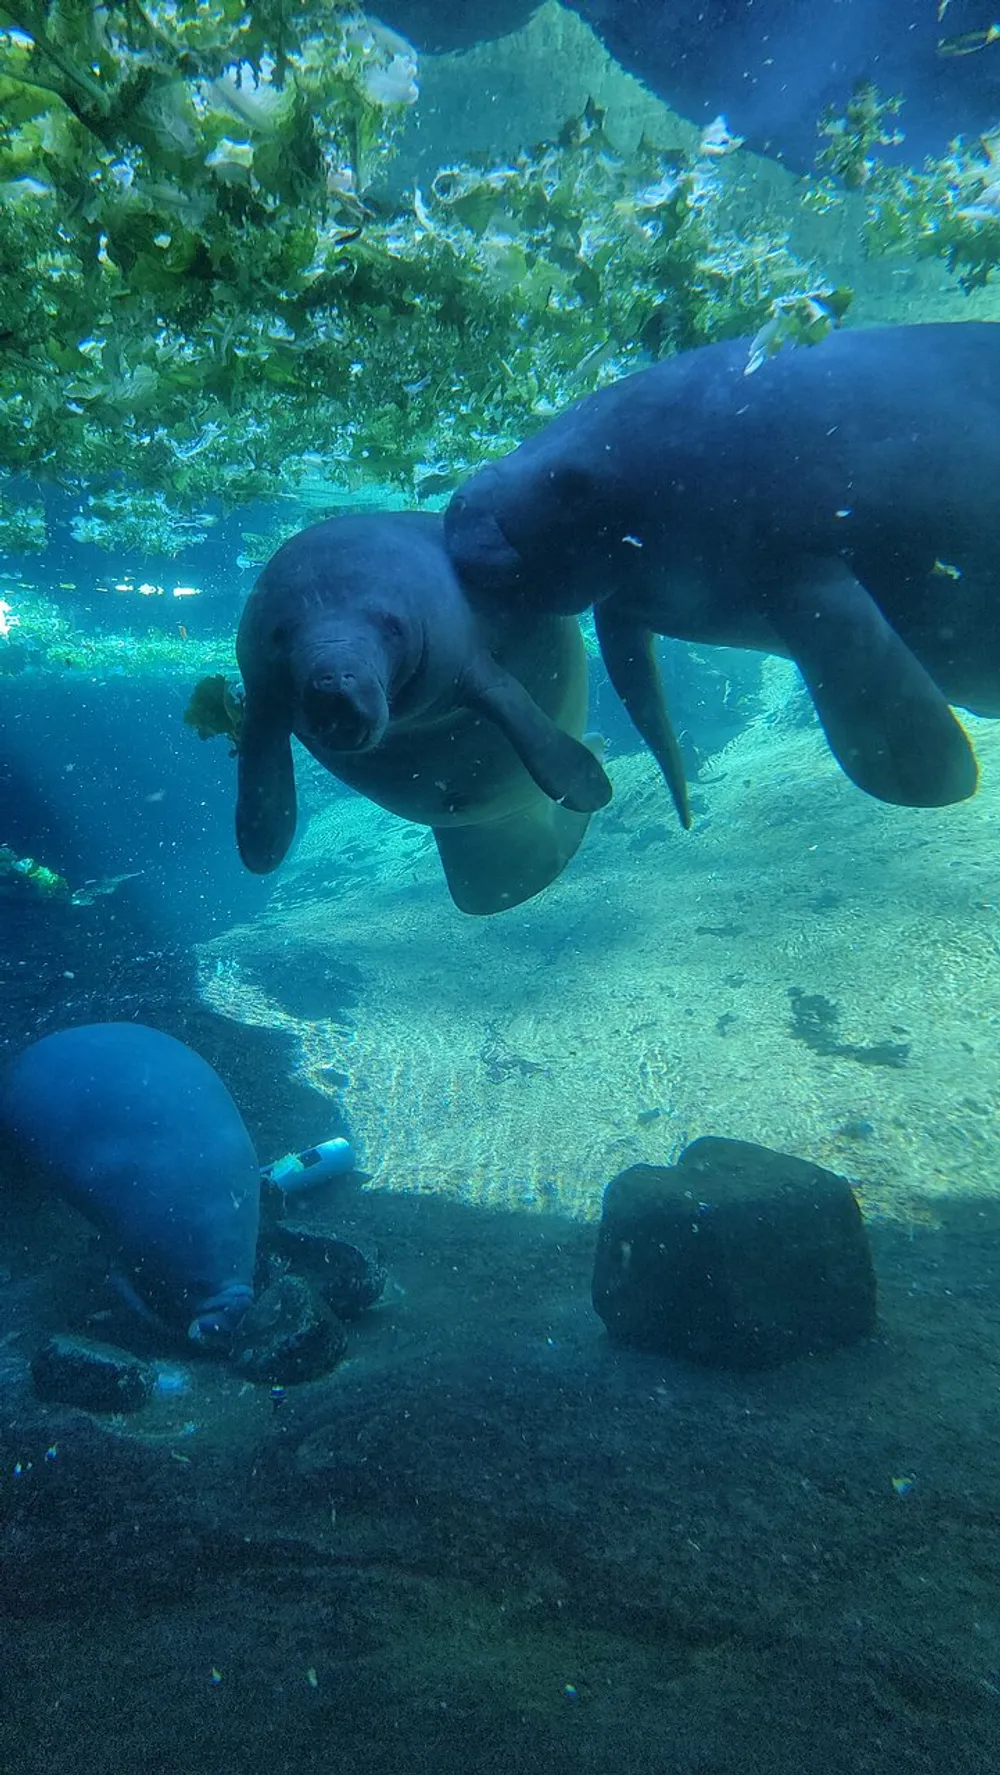 Two manatees are floating in clear blue water creating an underwater scene of serenity and grace